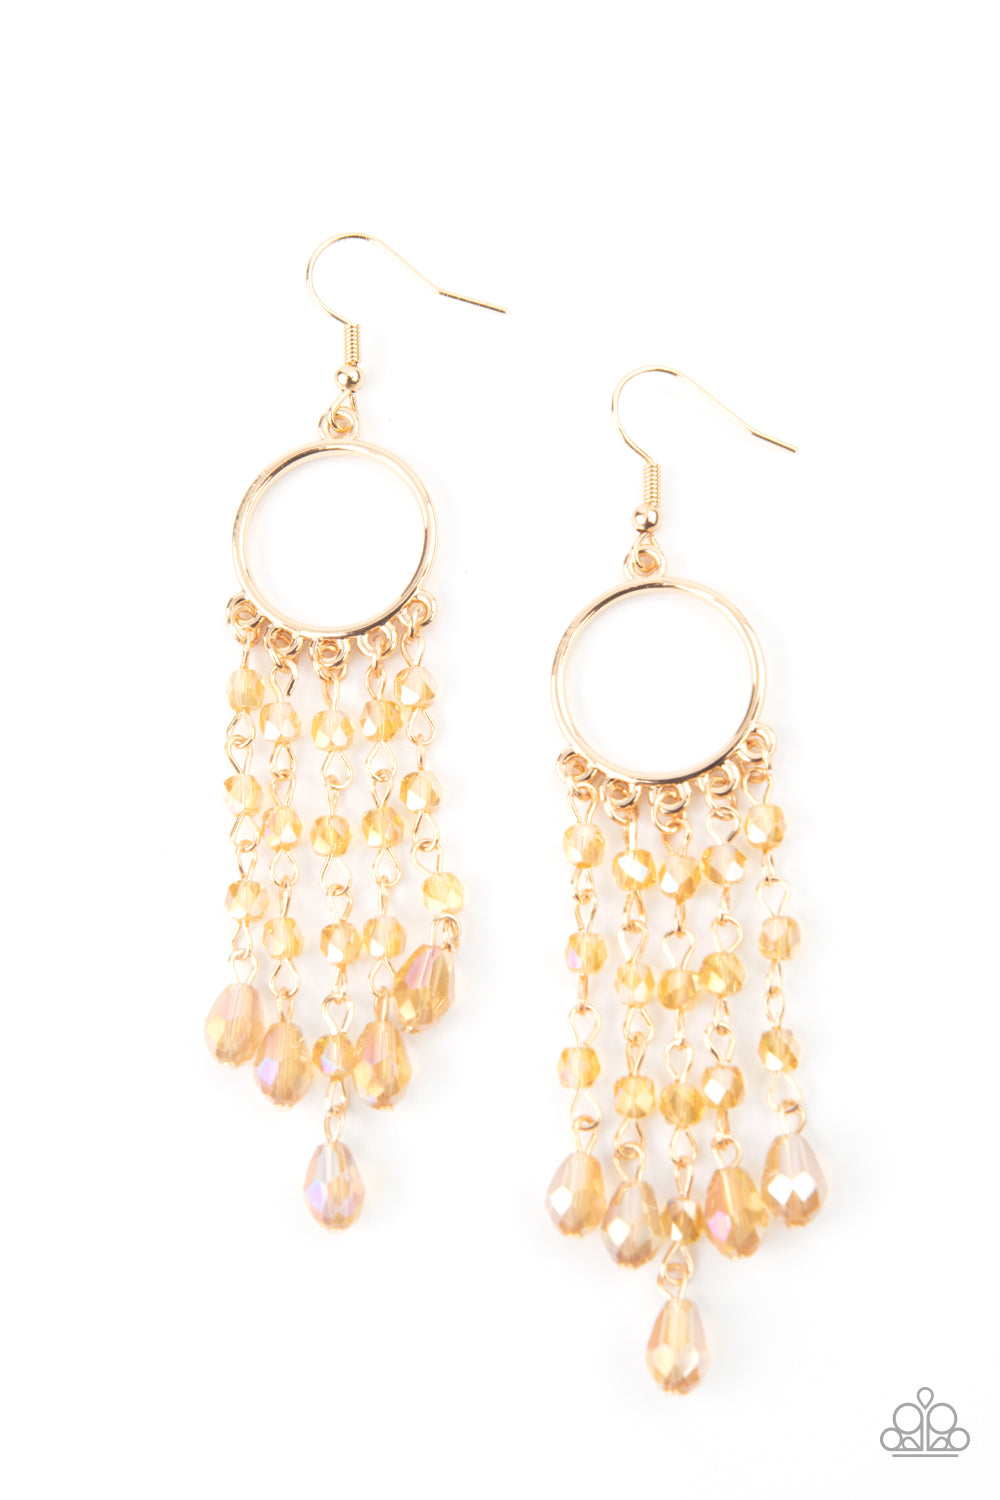 Dazzling Delicious Gold Earring - Paparazzi Accessories  Glittery rows of iridescently golden crystal-like beads stream from the bottom of a dainty gold hoop, creating a dazzling chandelier. Earring attaches to a standard fishhook fitting.  ﻿All Paparazzi Accessories are lead free and nickel free!  Sold as one pair of earrings.